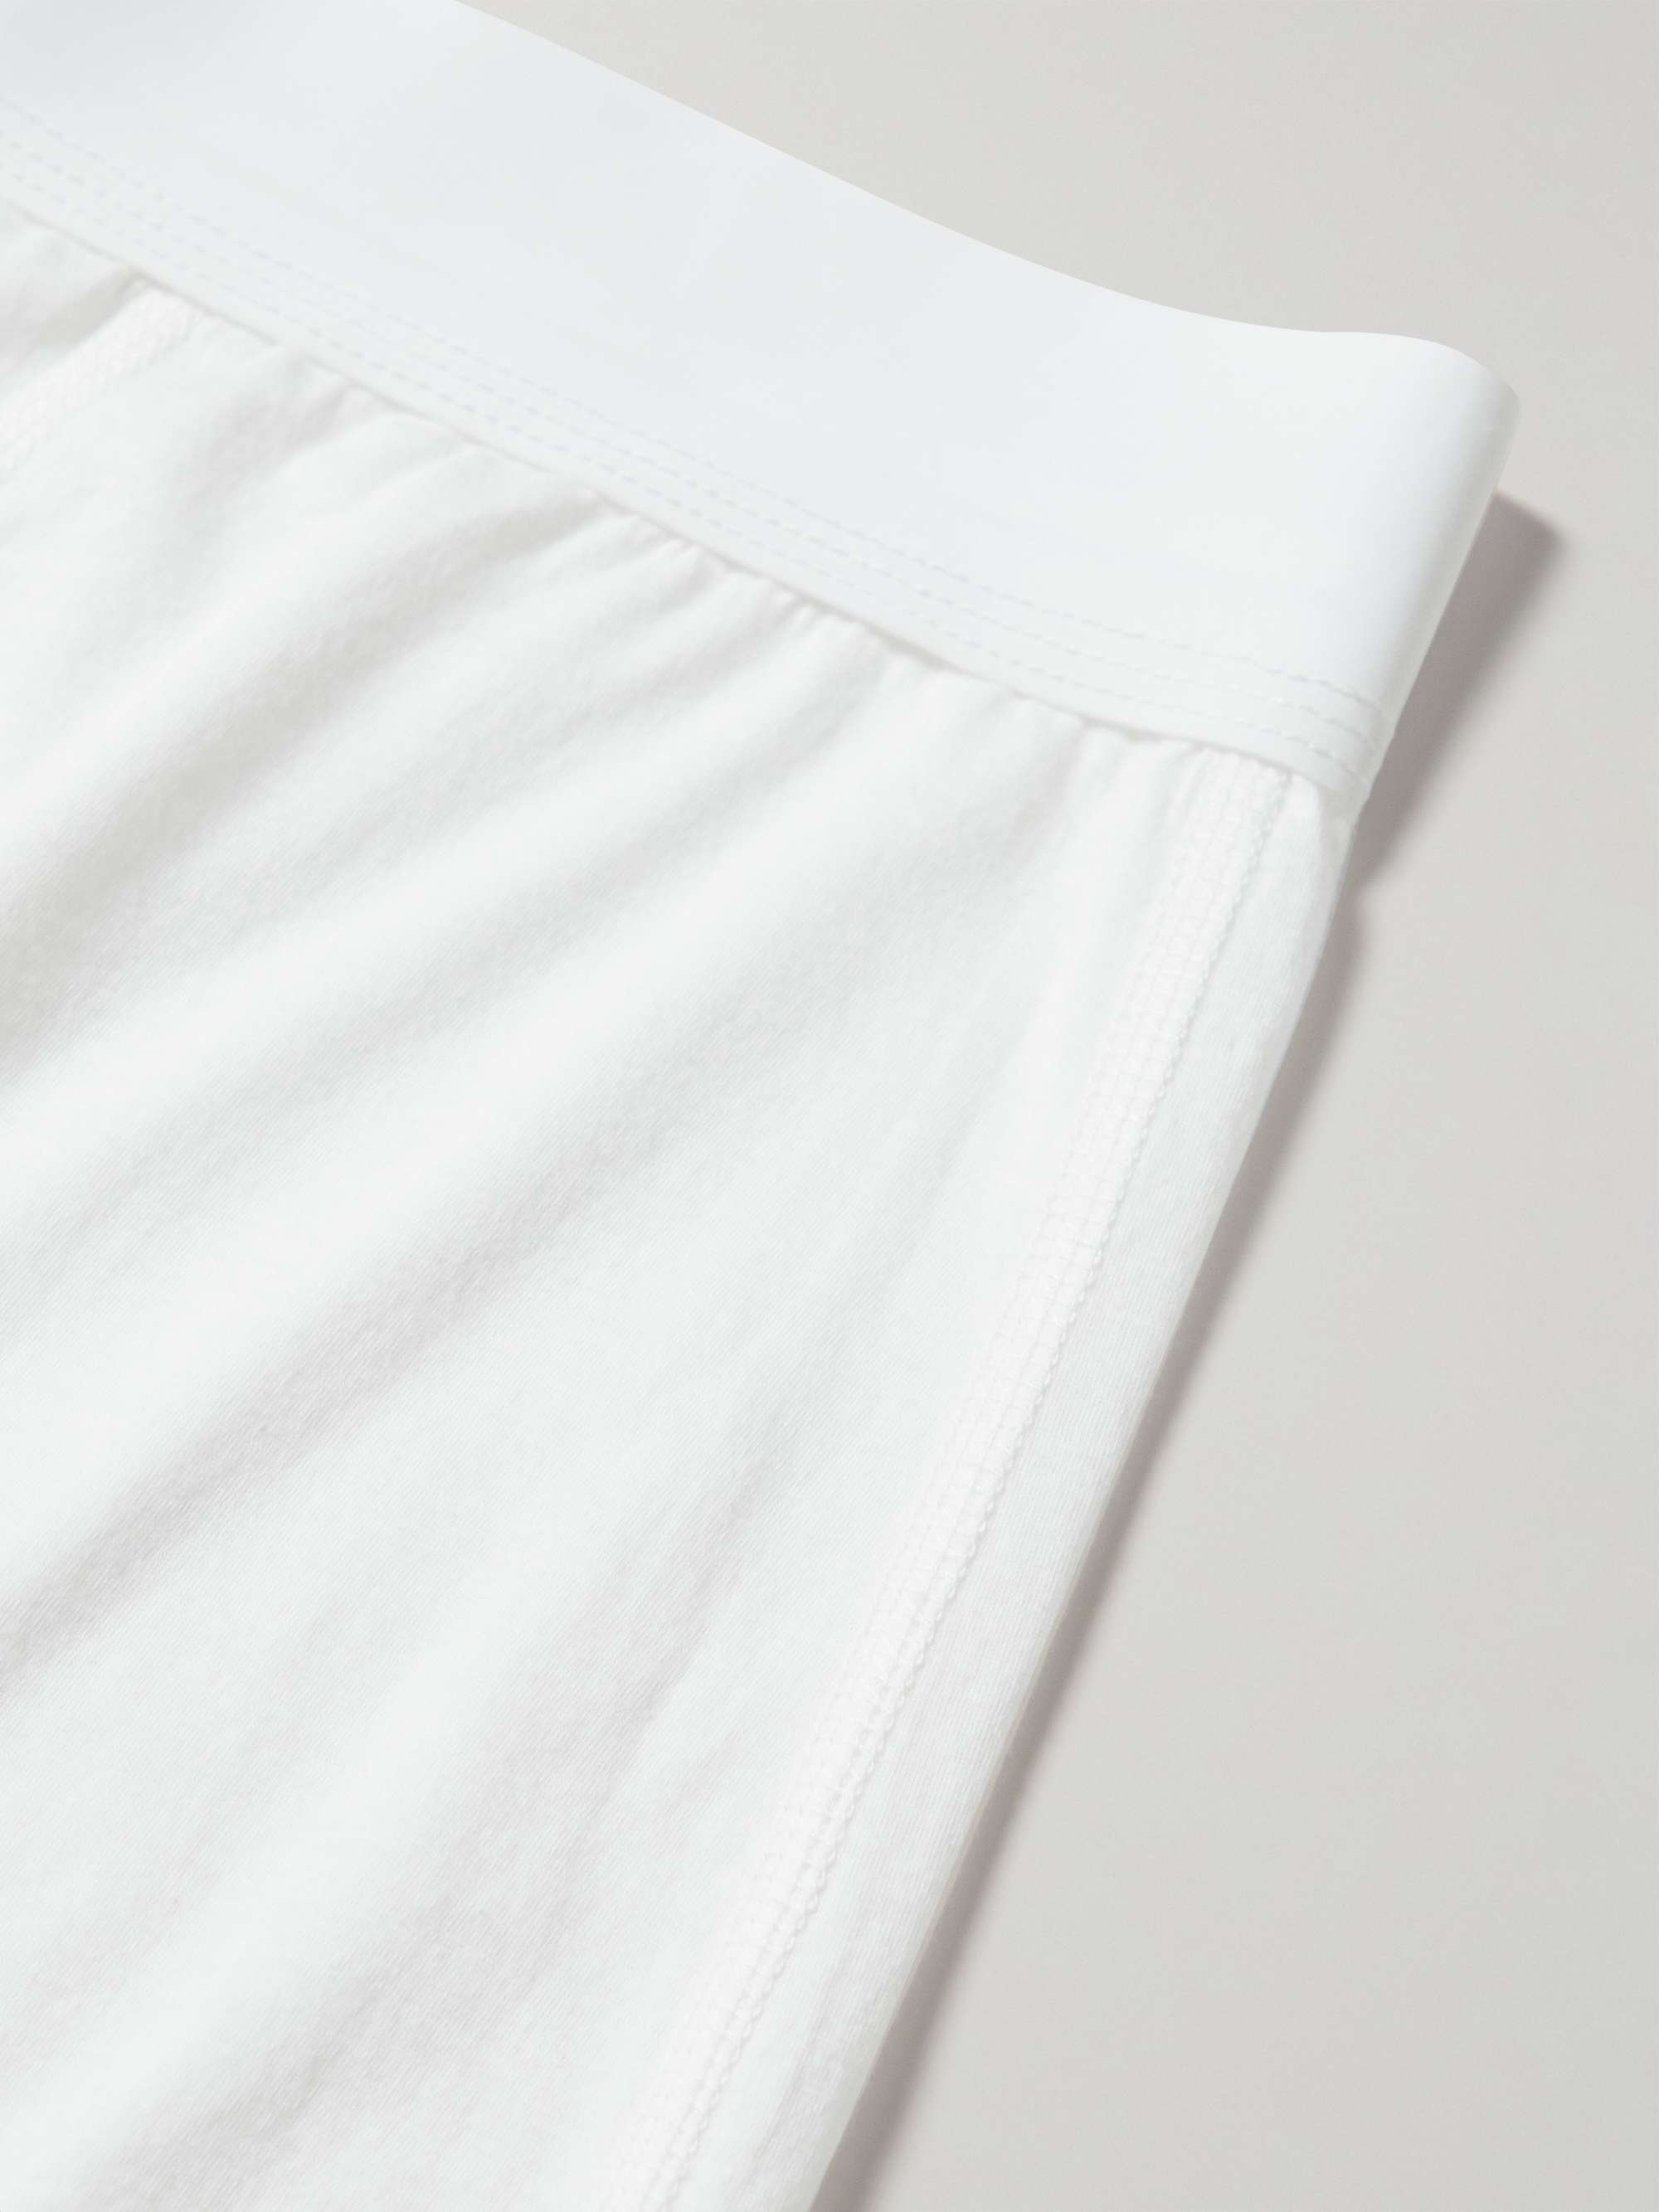 JAMES PERSE Luxe Lotus Cotton-Jersey Boxer Shorts